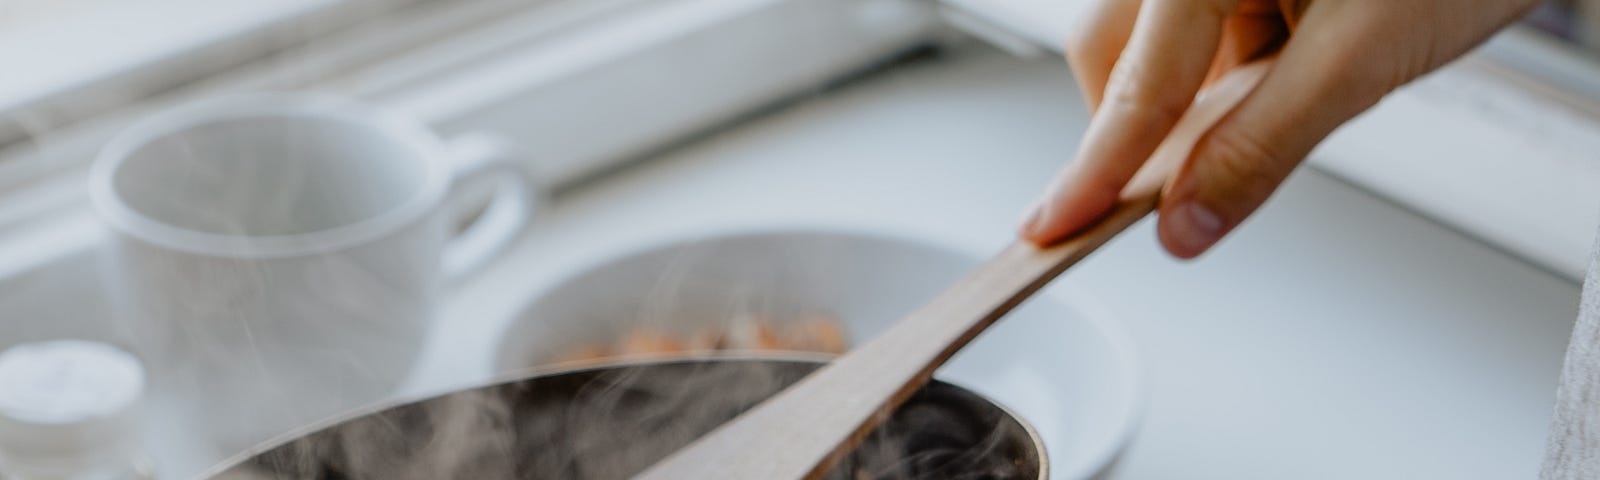 A wooden spoon scooping out steaming hot food from a skillet onto a plate